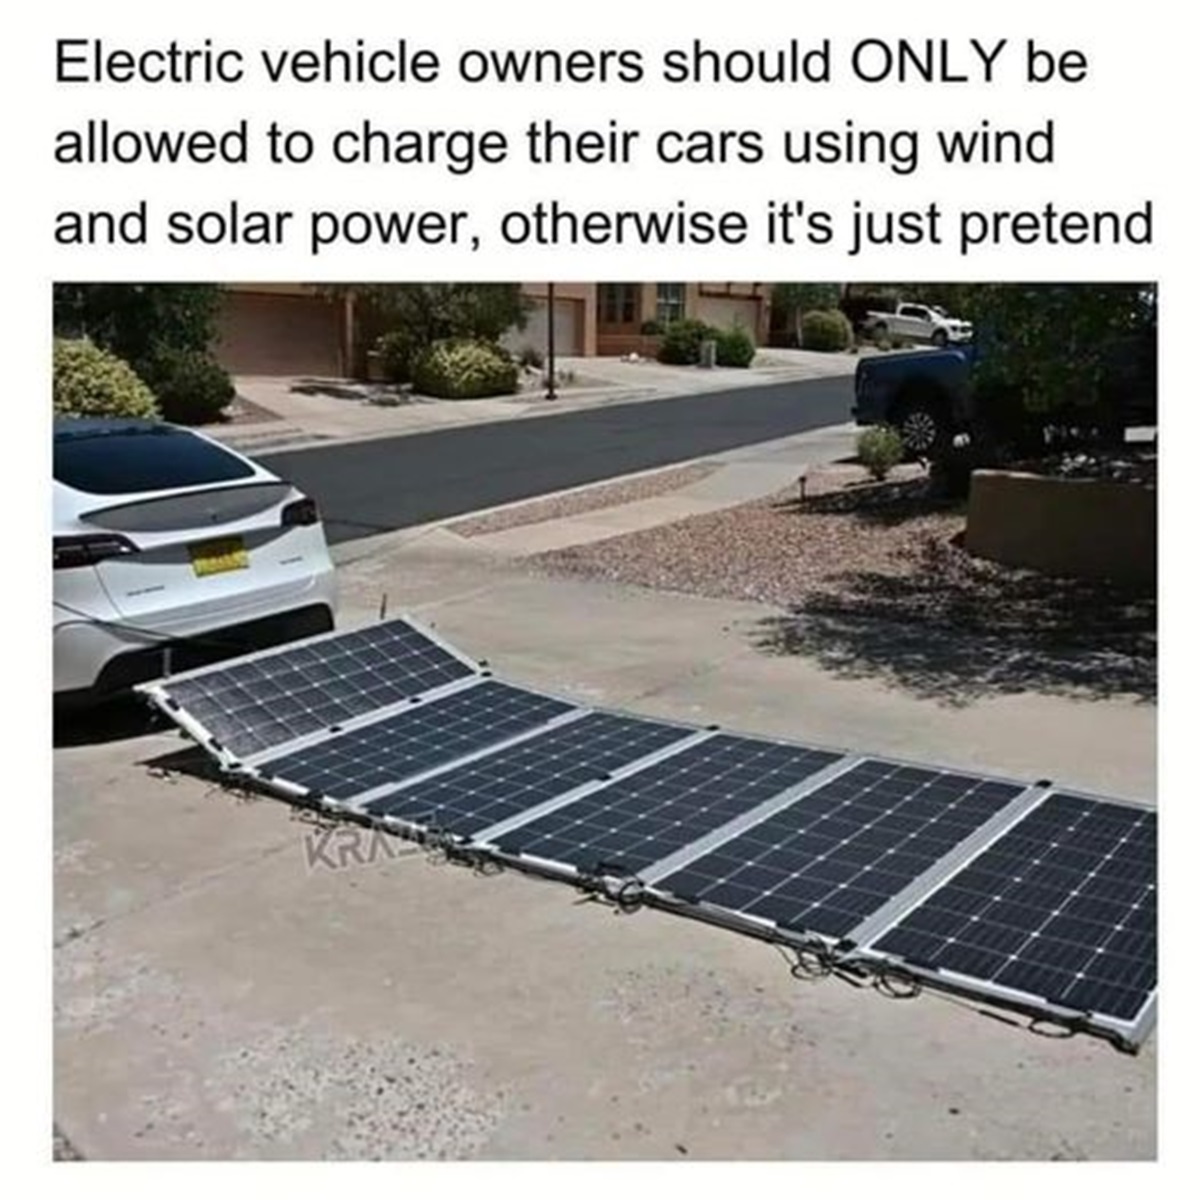 Electric vehicle - Electric vehicle owners should Only be allowed to charge their cars using wind and solar power, otherwise it's just pretend Kra